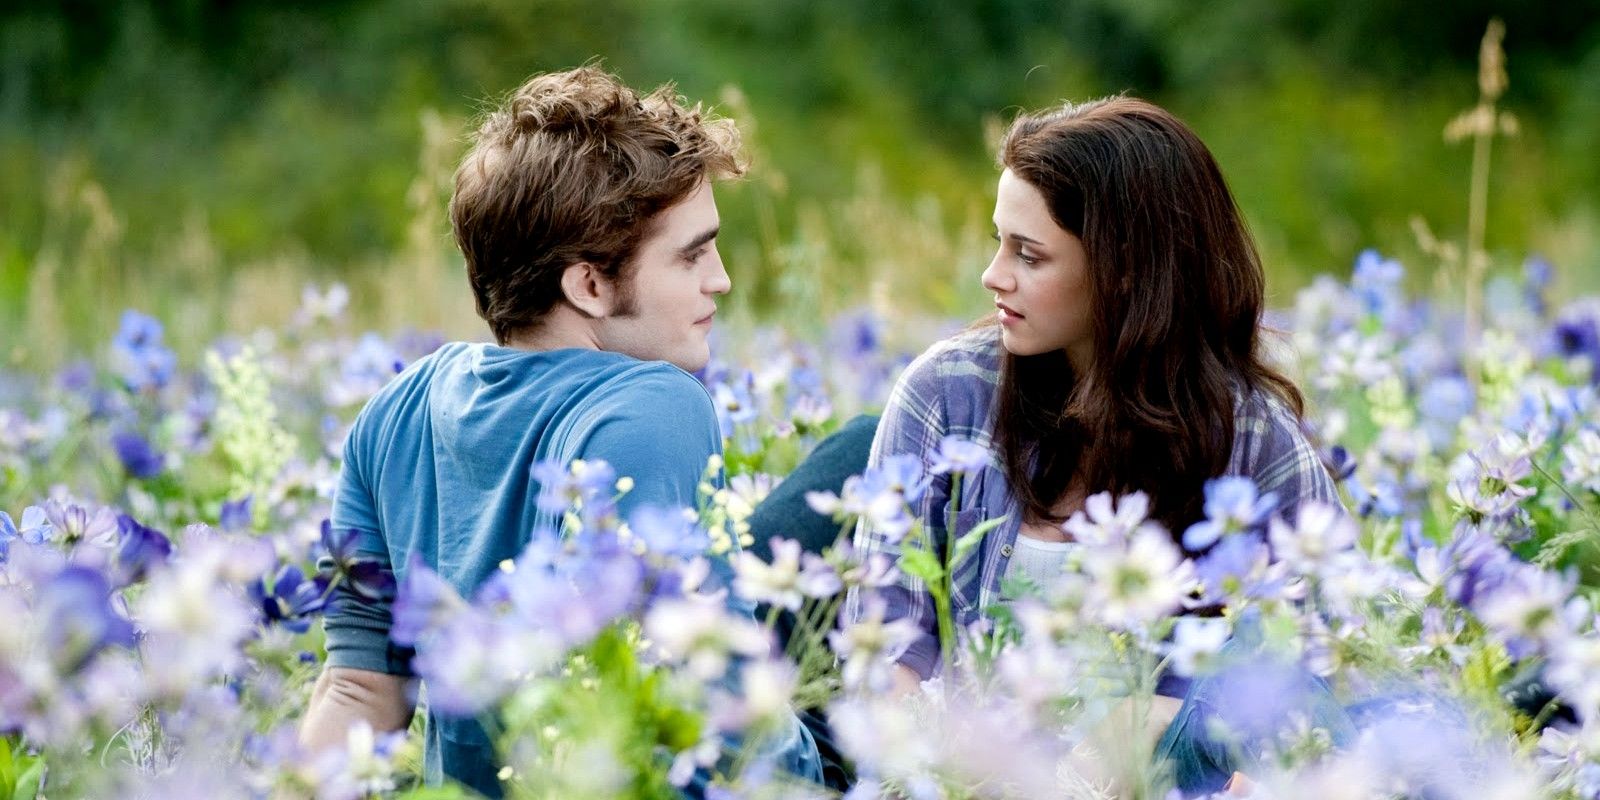 Edward and Bella sitting among a field of flowers in Twilight Eclipse